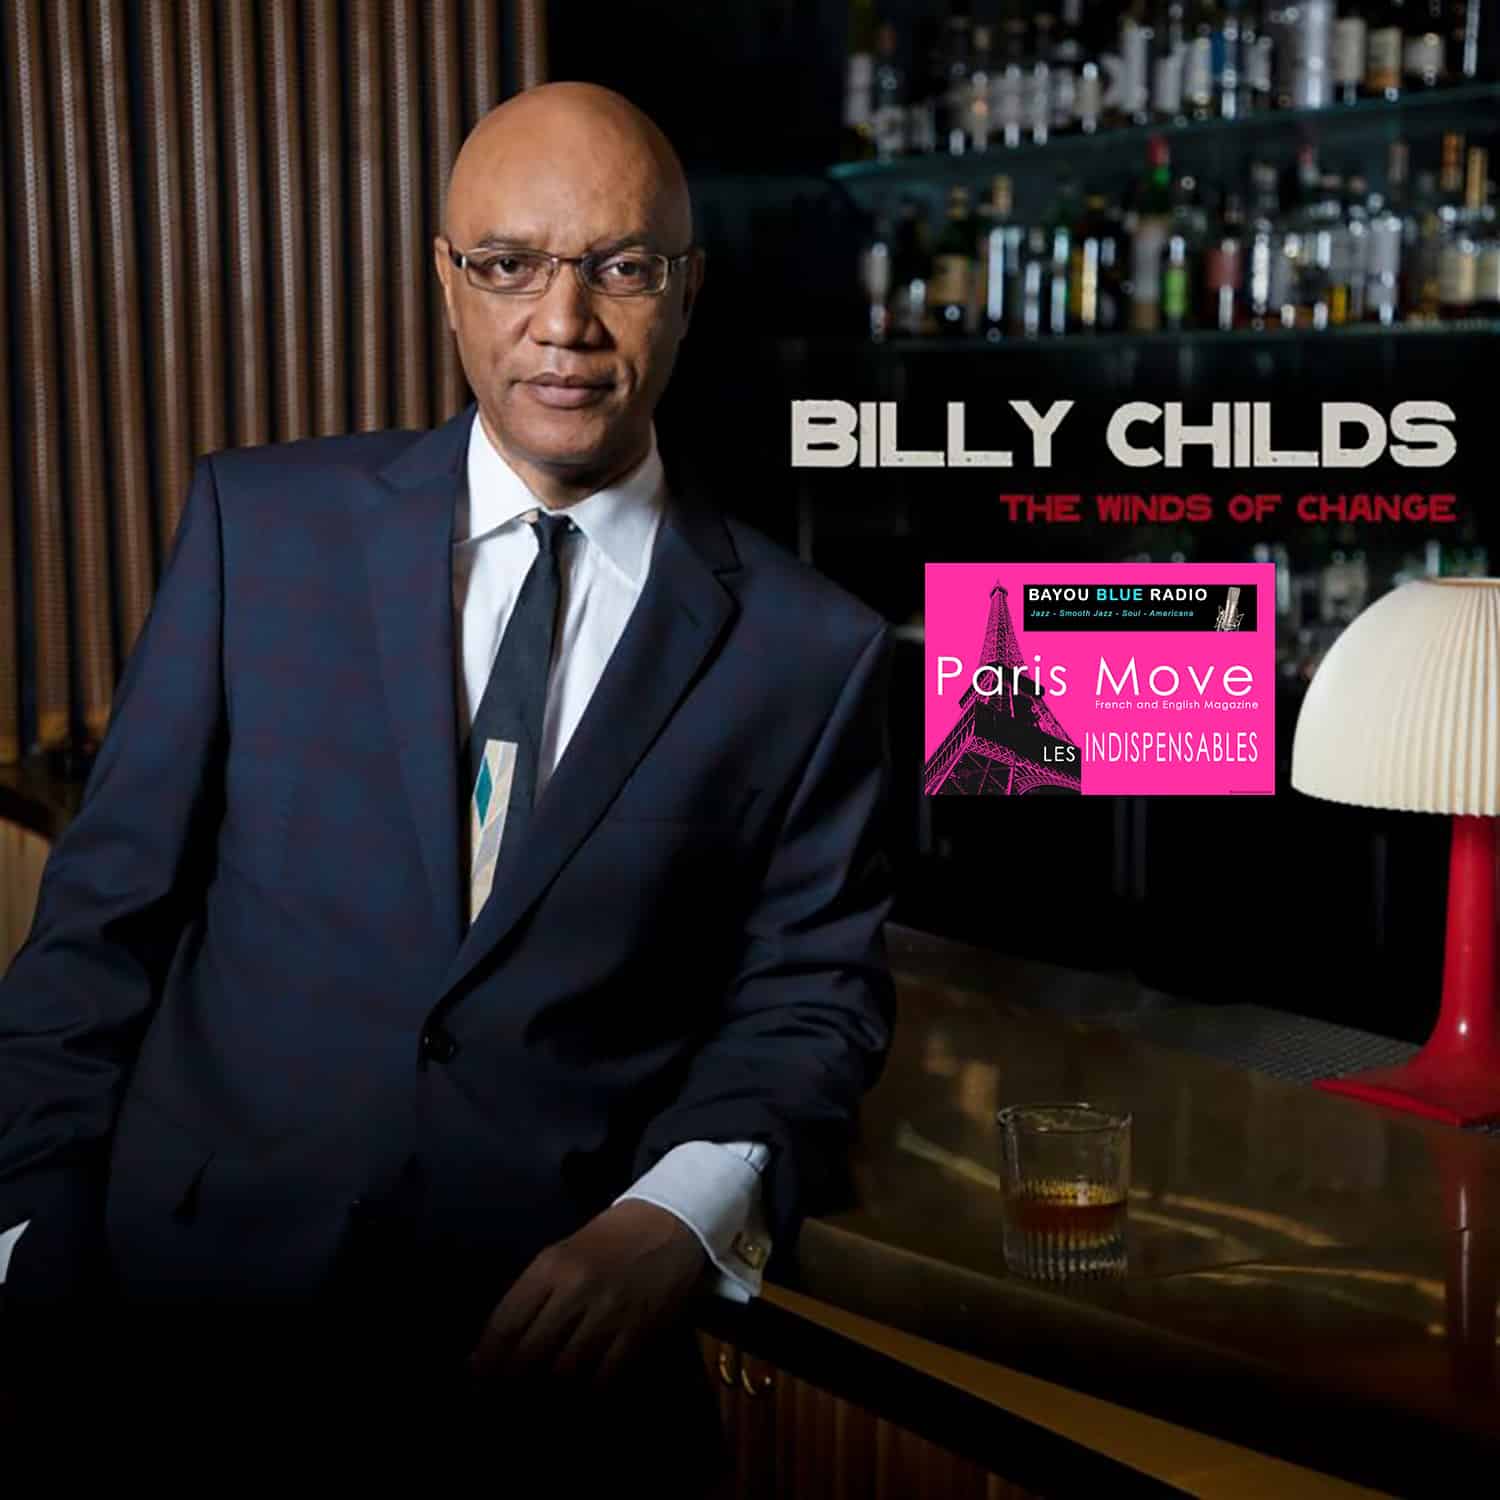 Billy Childs - The Winds of Change